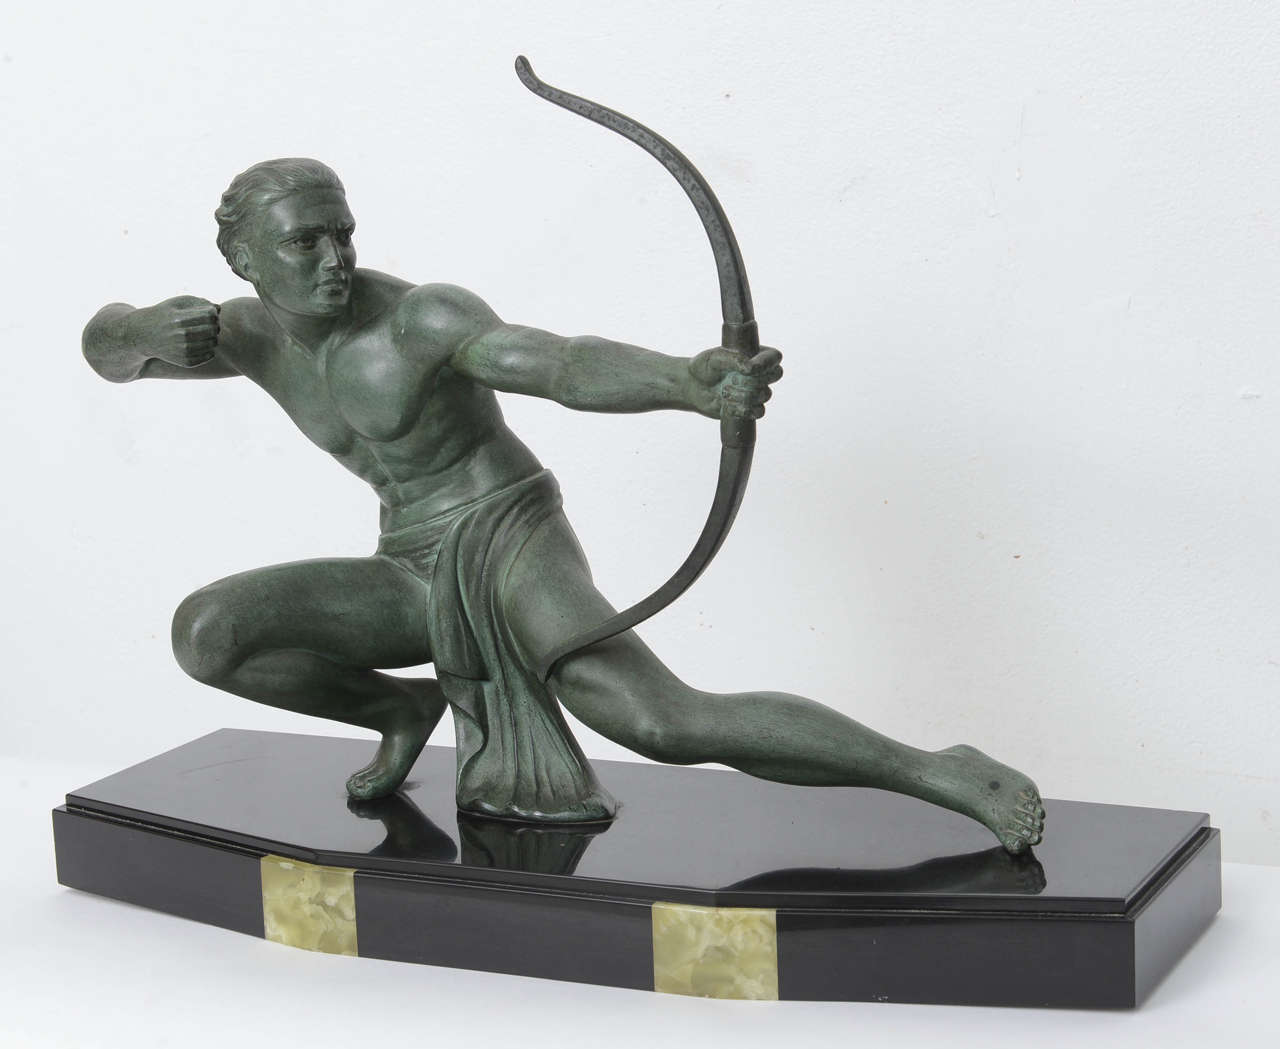 White metal archer with a patinated bronze finish on a marble base with inlaid details.

Please feel free to contact us directly for a shipping quote or any additional information by clicking 